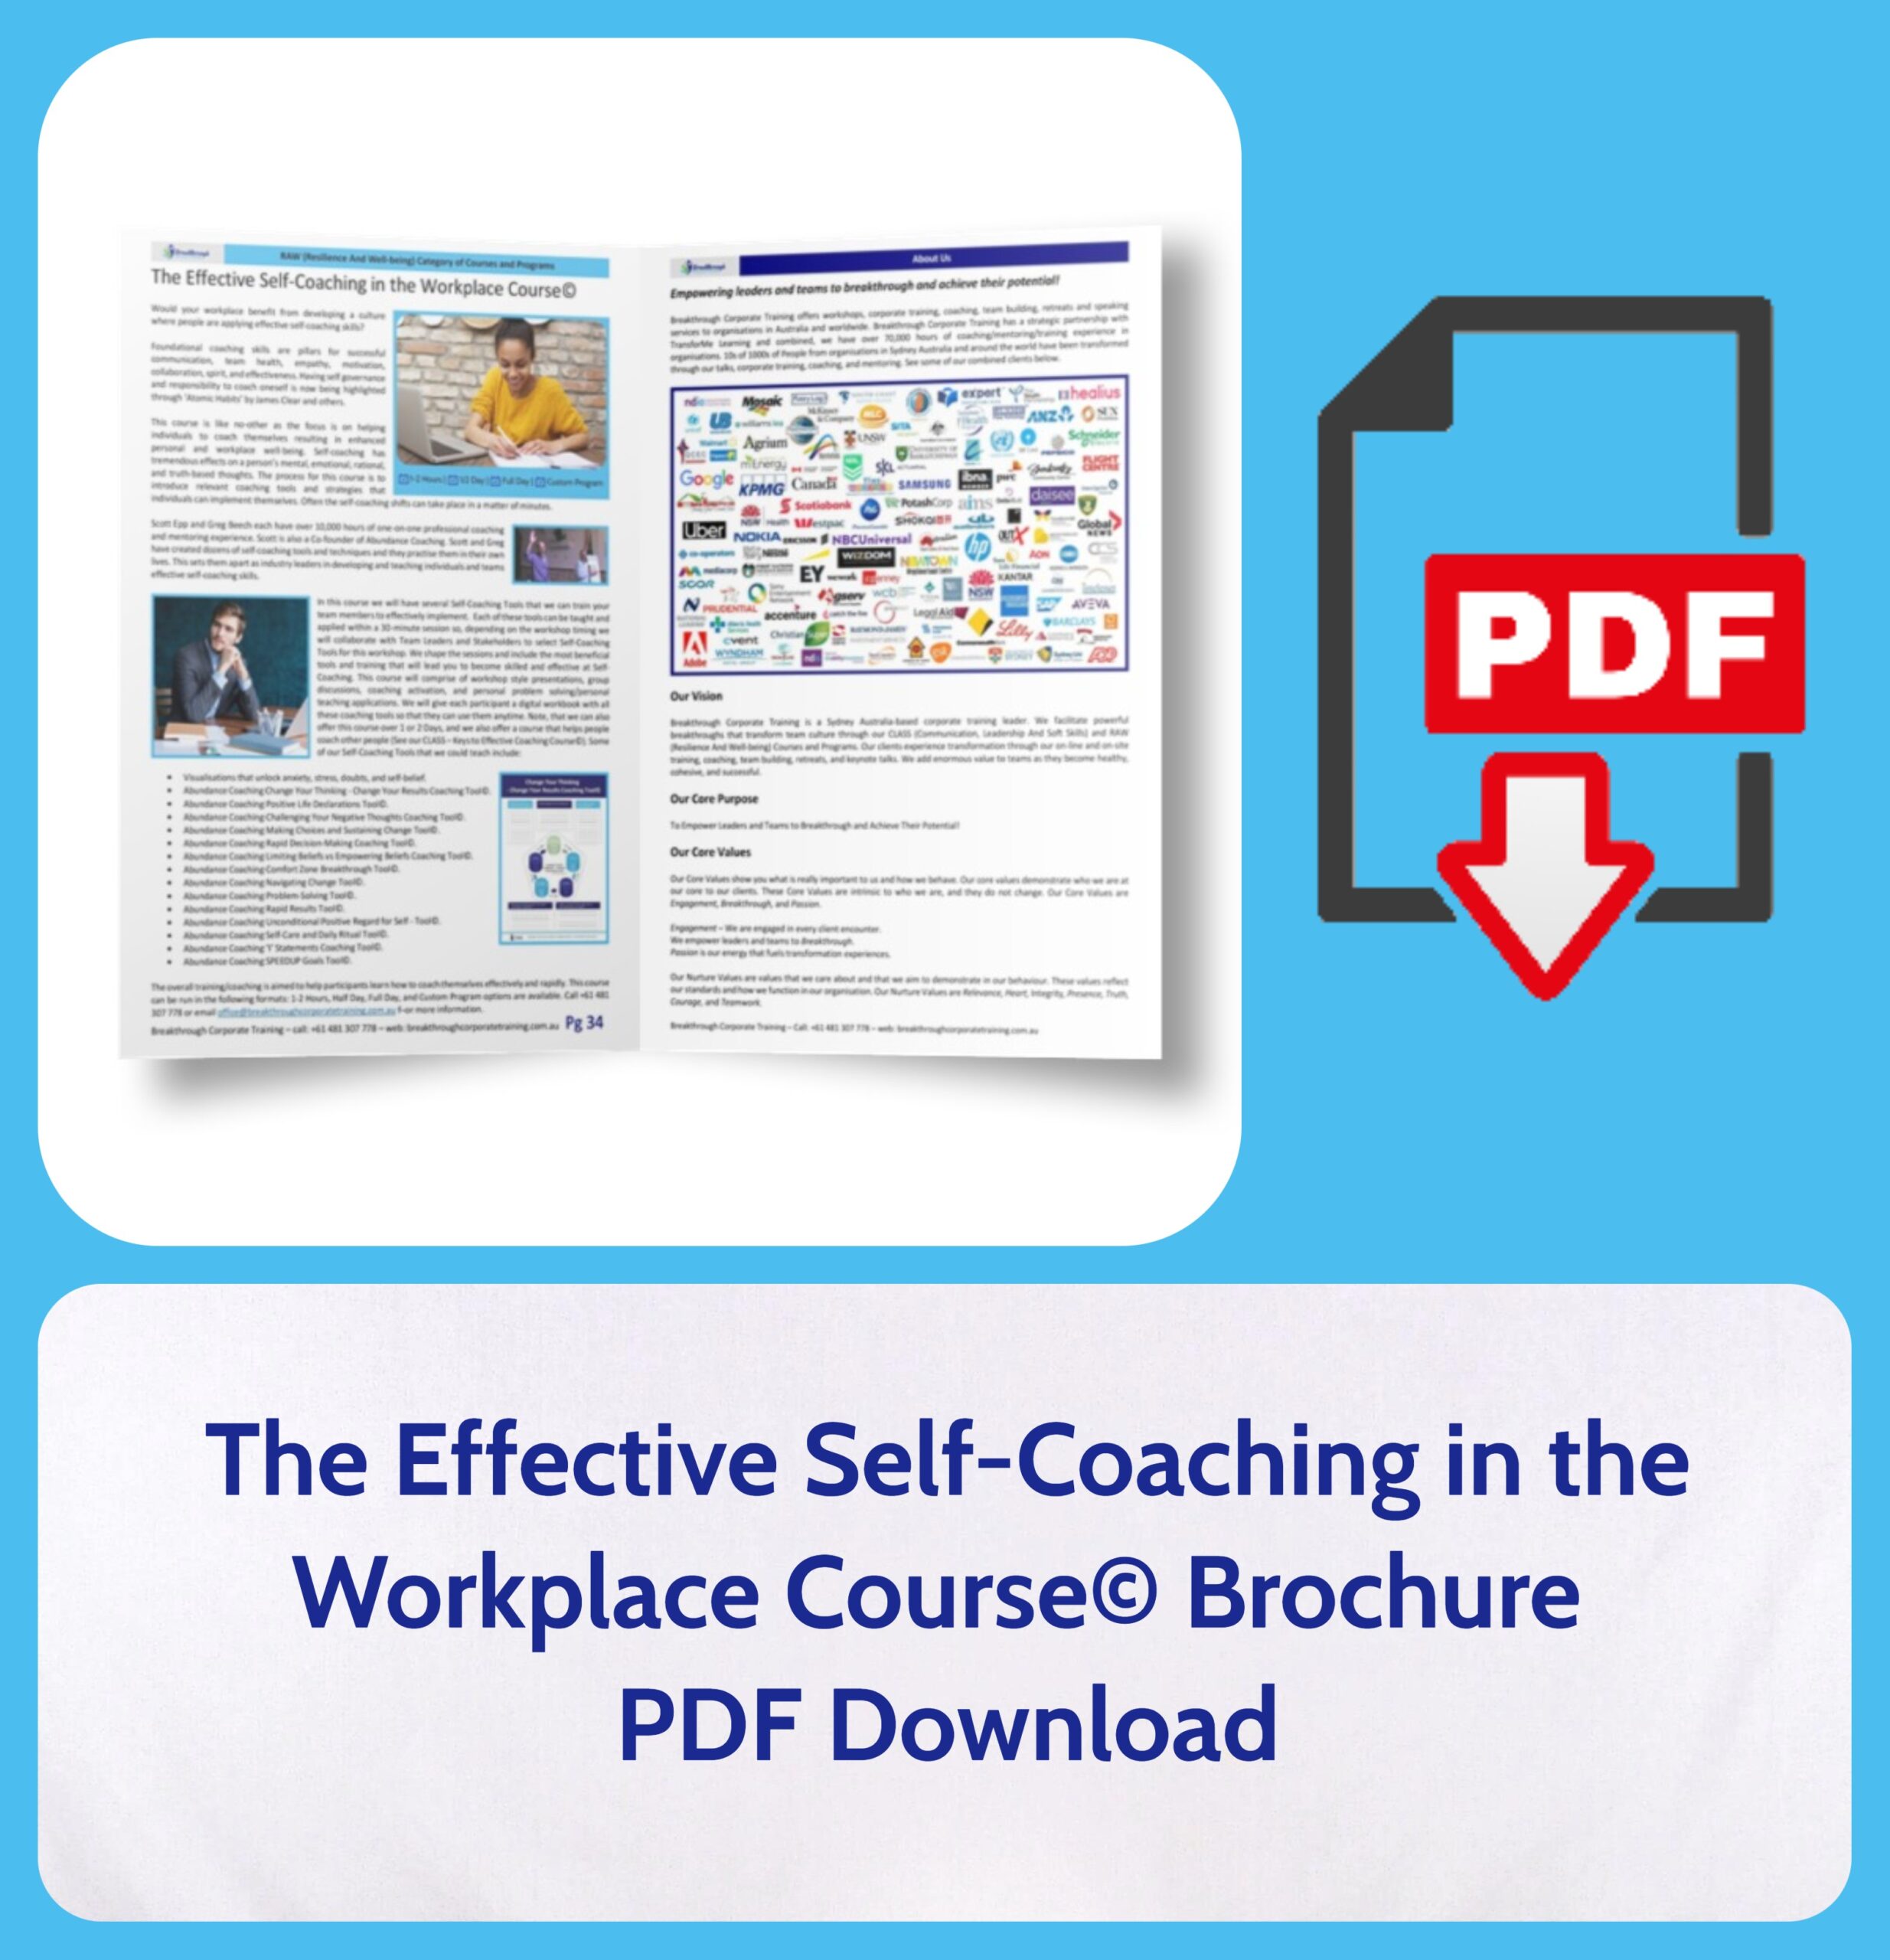 The Effective Self-Coaching in the Workplace Course